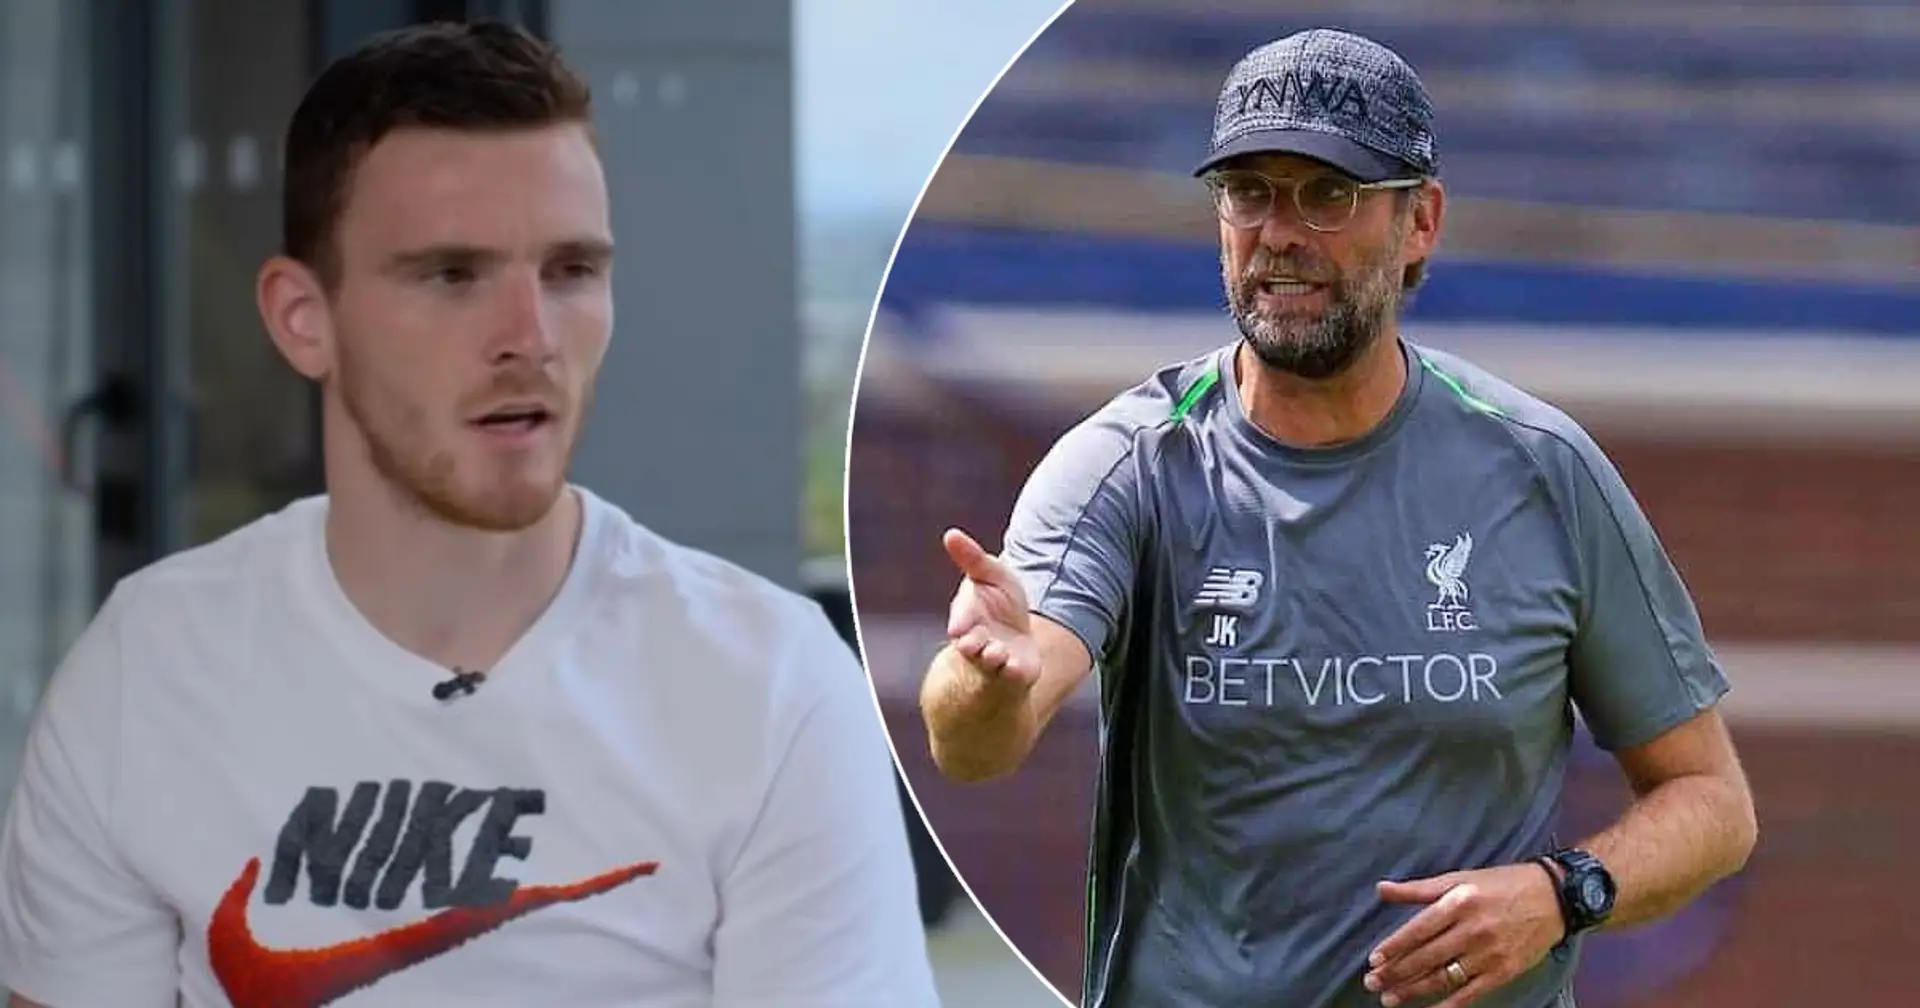 'I was pretty tired': Robertson opens up on Klopp's treatment of returning Euro 2020 players